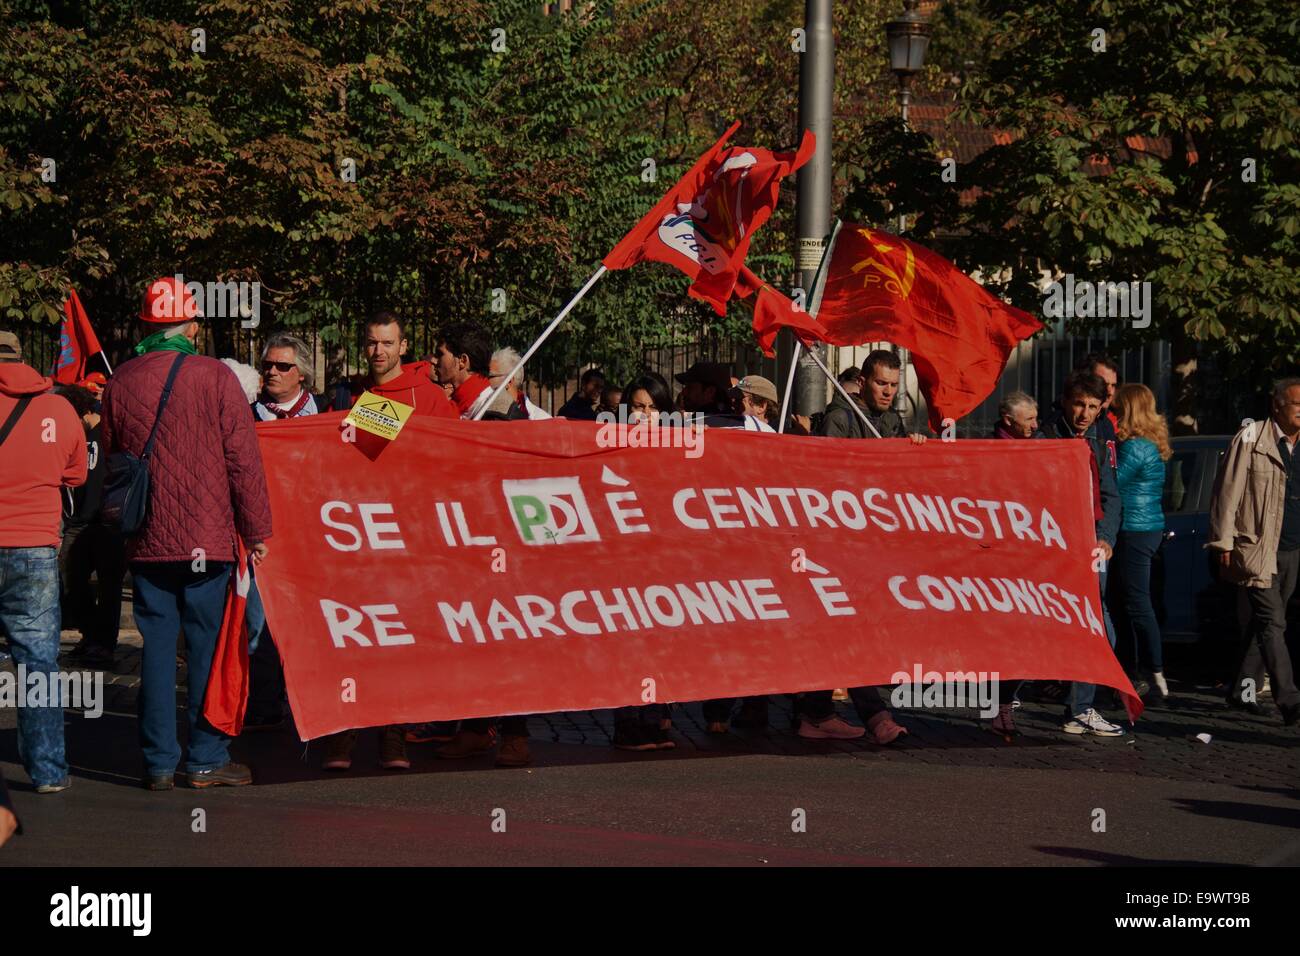 Protesters march against Renzi labor reforms Stock Photo